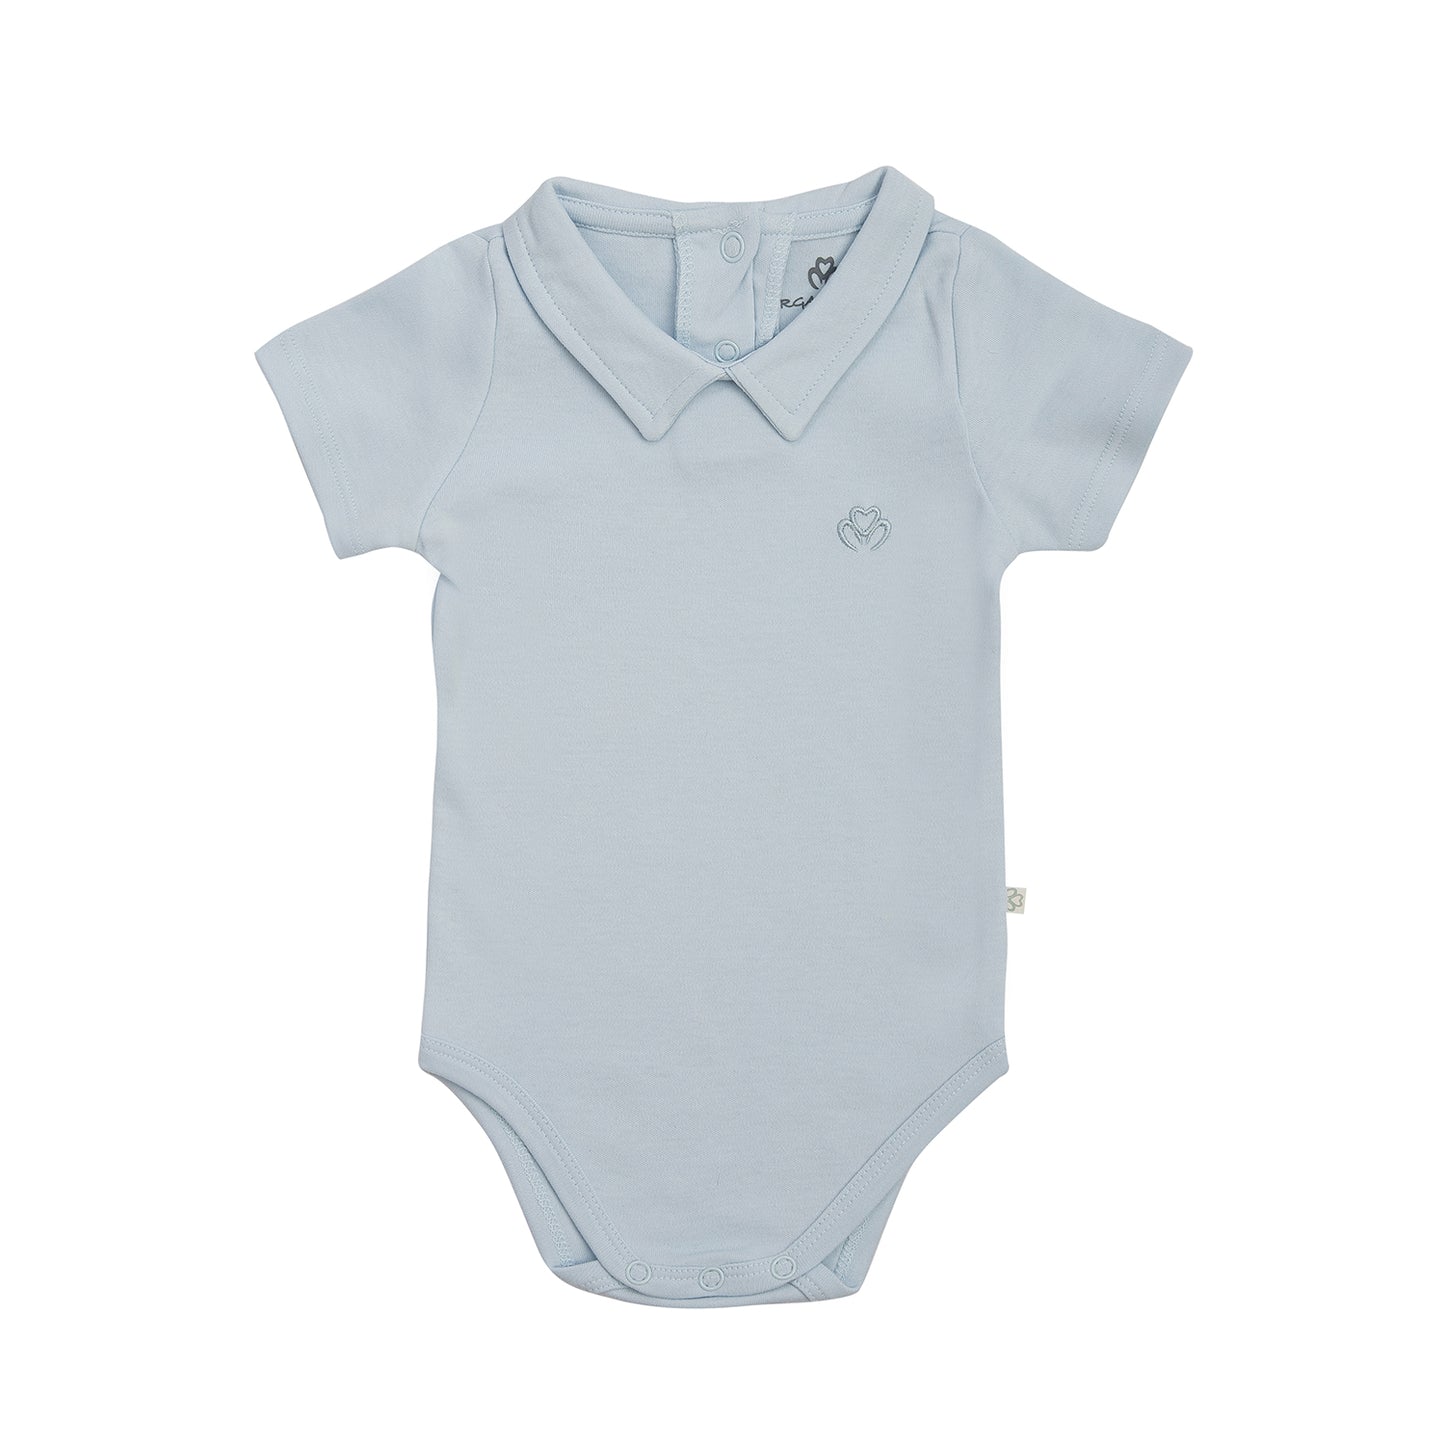 Organic Polo collar bodysuit for baby girls and boys Aged 0-24 Months colored Blue